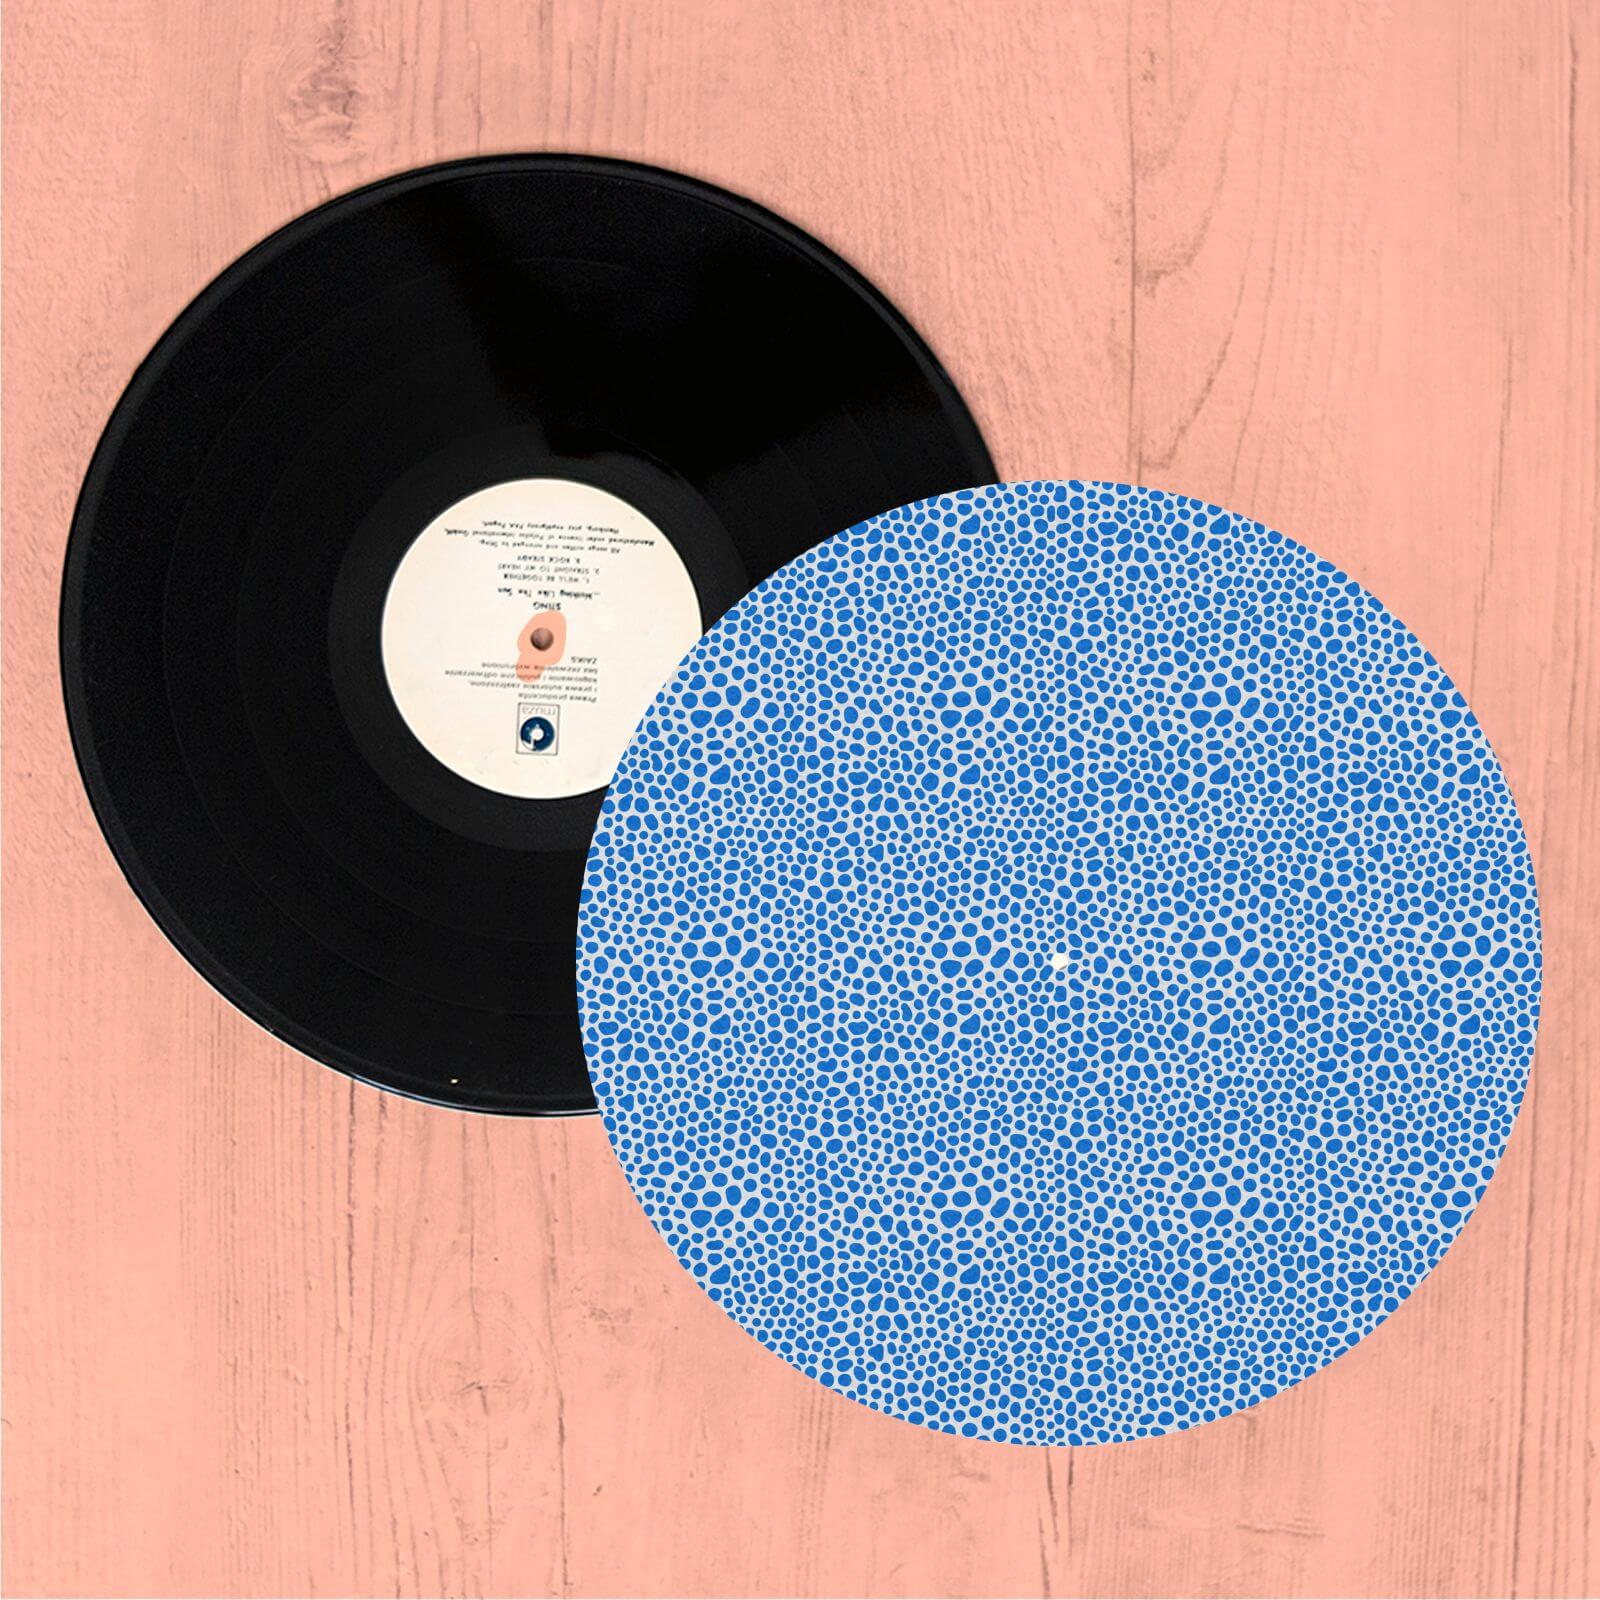 By IWOOT Blotty Dots Turntable Slip Mat